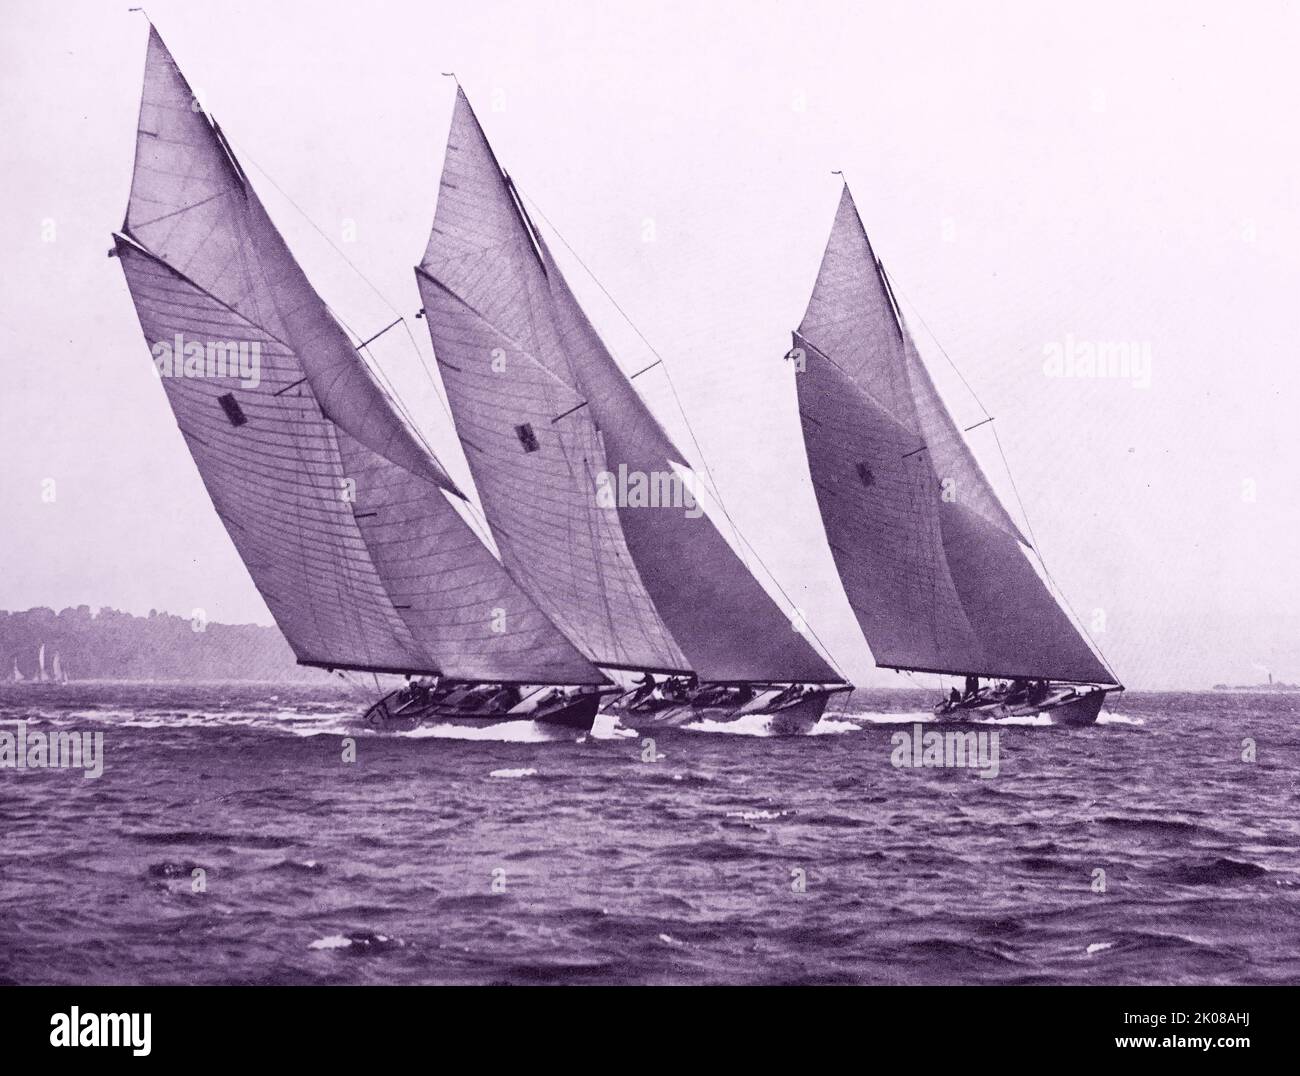 New York Forties. Sailing yachts on the Atlantic Ocean near New York. Black and white photograph Stock Photo